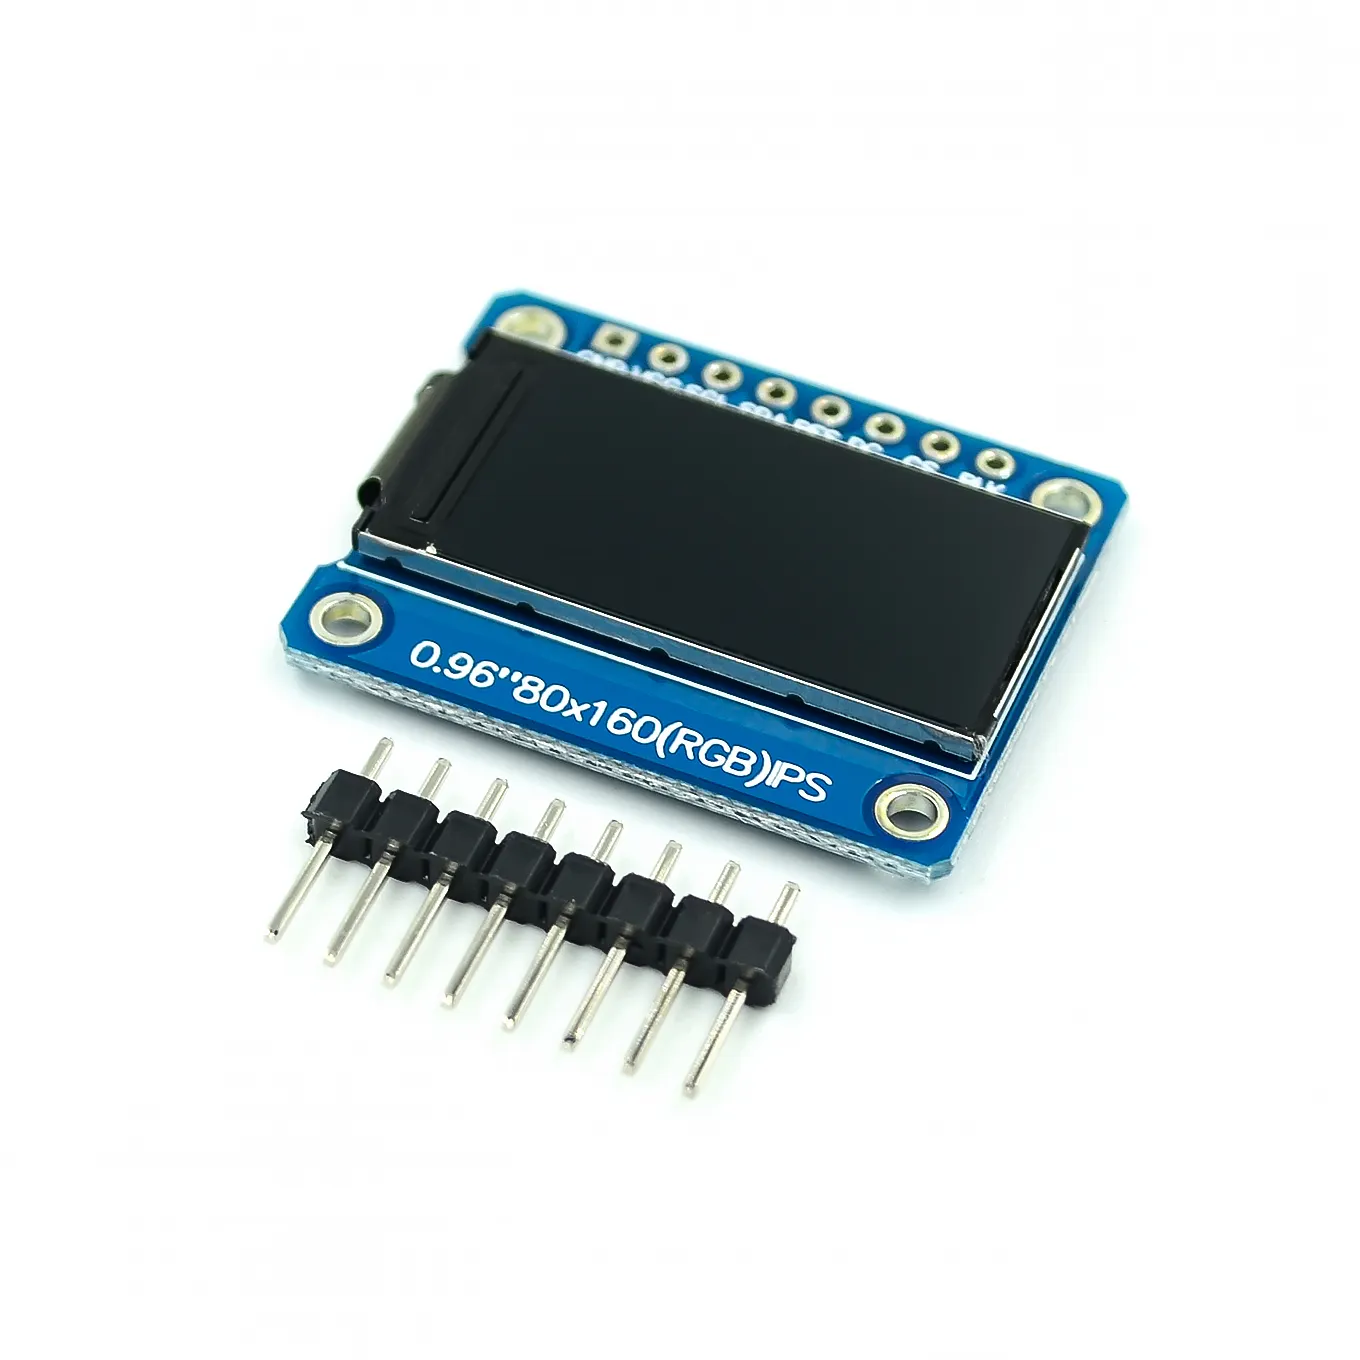 TFT Display 0.96 inch IPS 7P SPI HD 65K Full Color LCD Module ST7735 Drive IC 80*160 (Not OLED) For Arduino